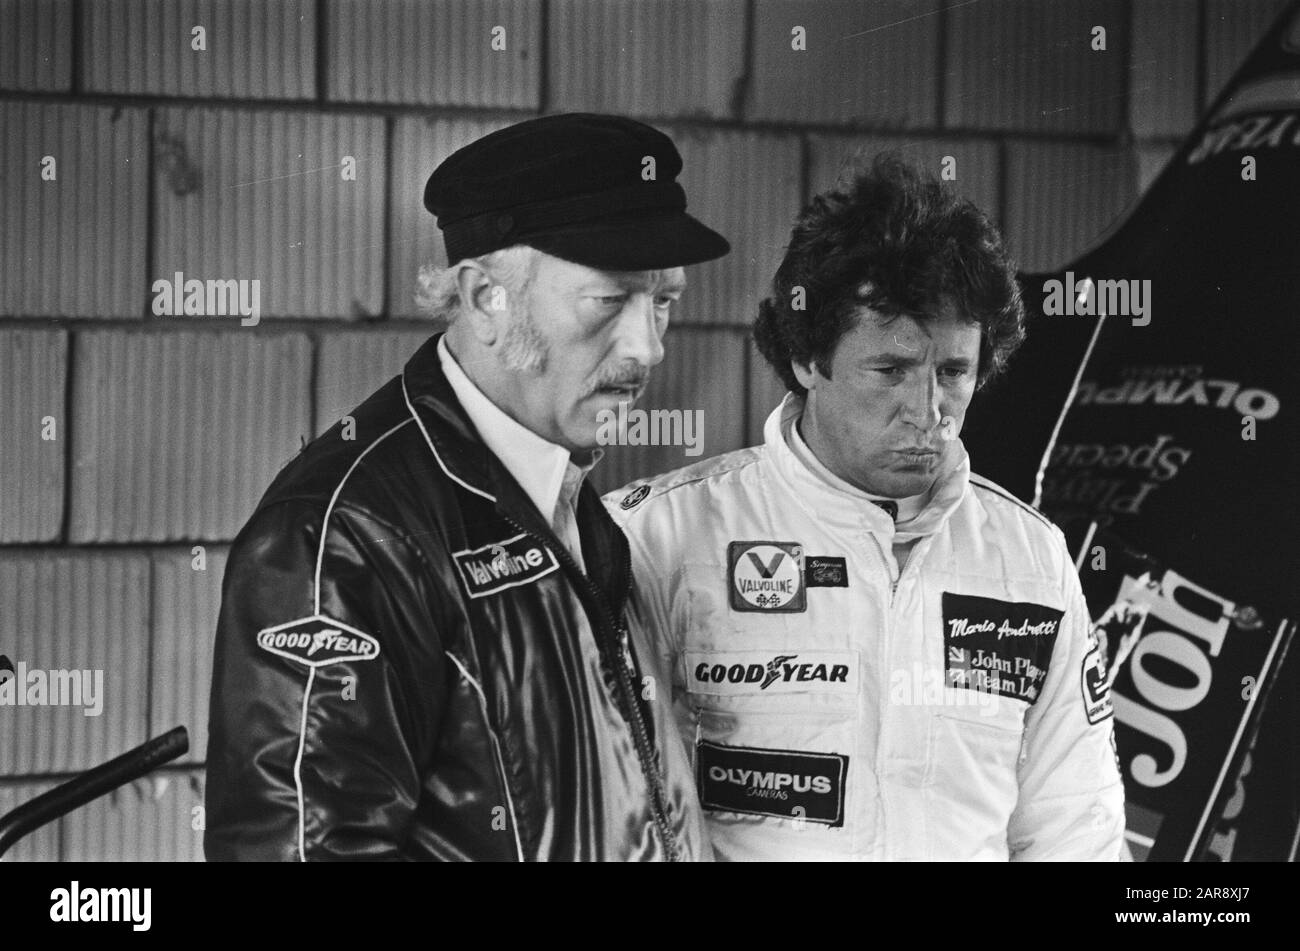 Training Grand Prix Zandvoort; lotusteam-manager Colin Chapmann (l) and Mario Andretti Date: August 25, 1978 Location: Noord-Holland, Zandvoort Keywords: trainings Person name: colin chapmann Stock Photo